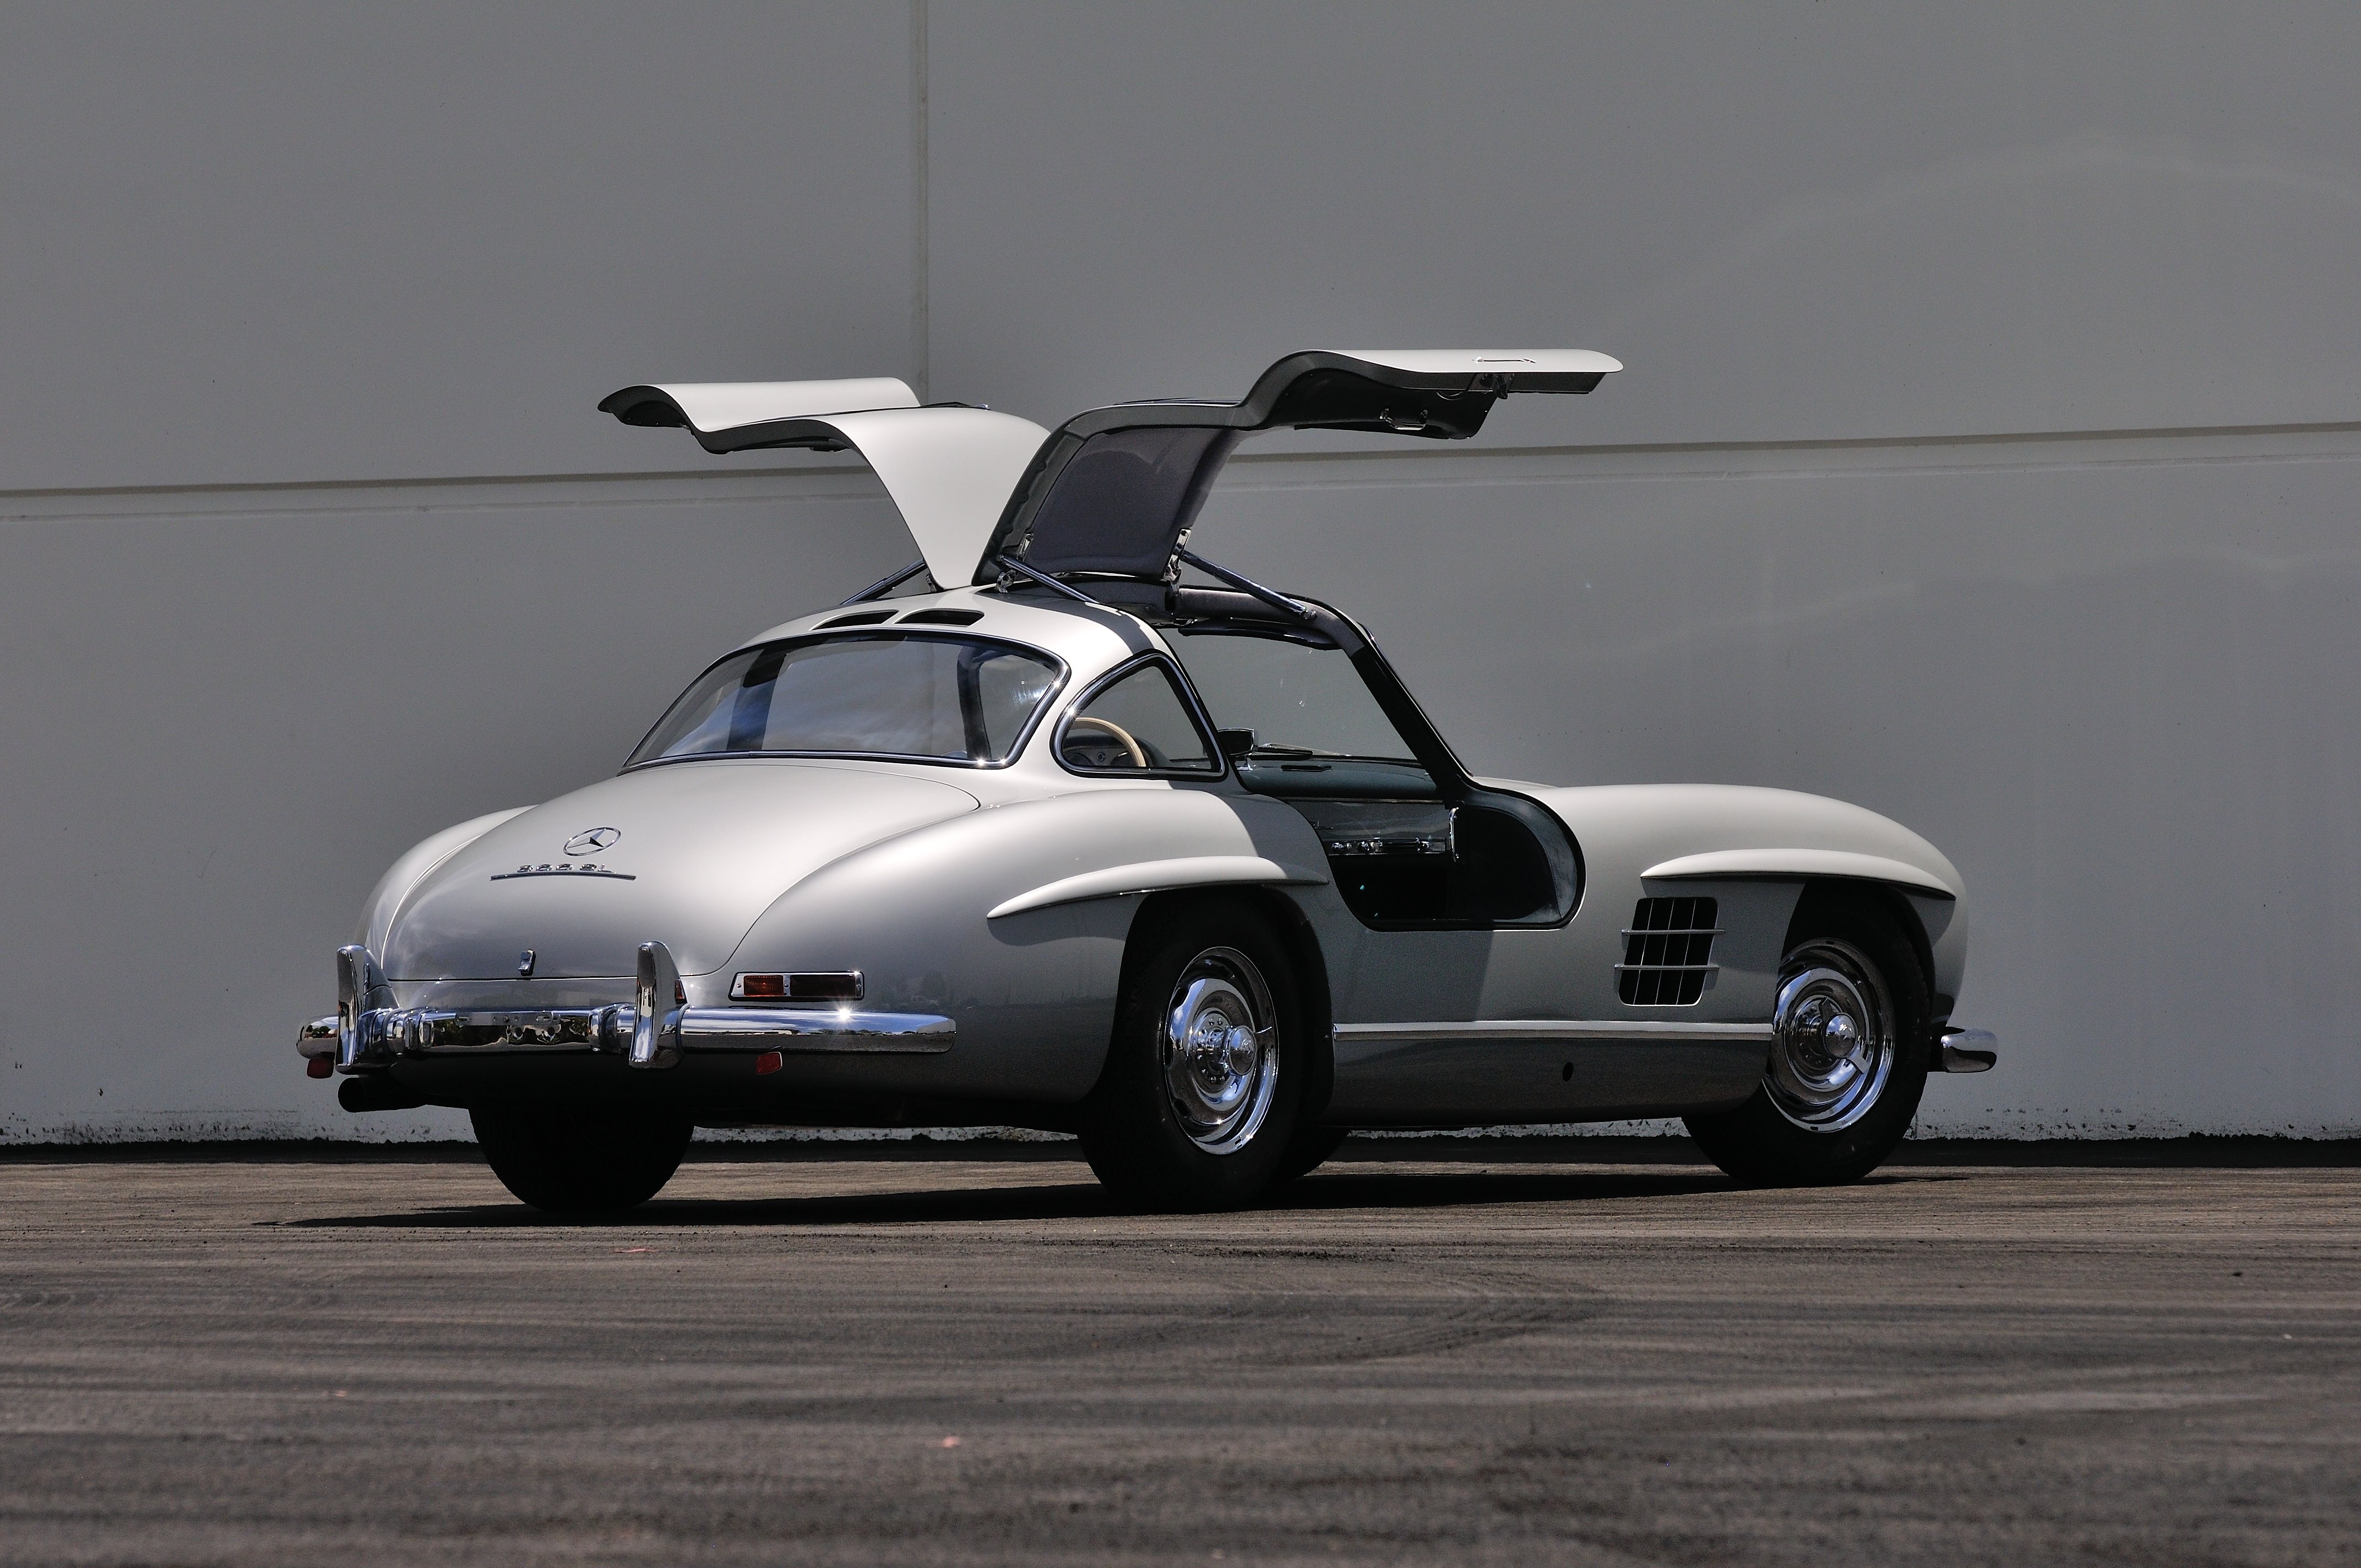 1955, Mercedes, Benz, 300sl, Gullwing, Sport, Classic, Old, Vintage, Germany, 4288x28480 10 Wallpaper